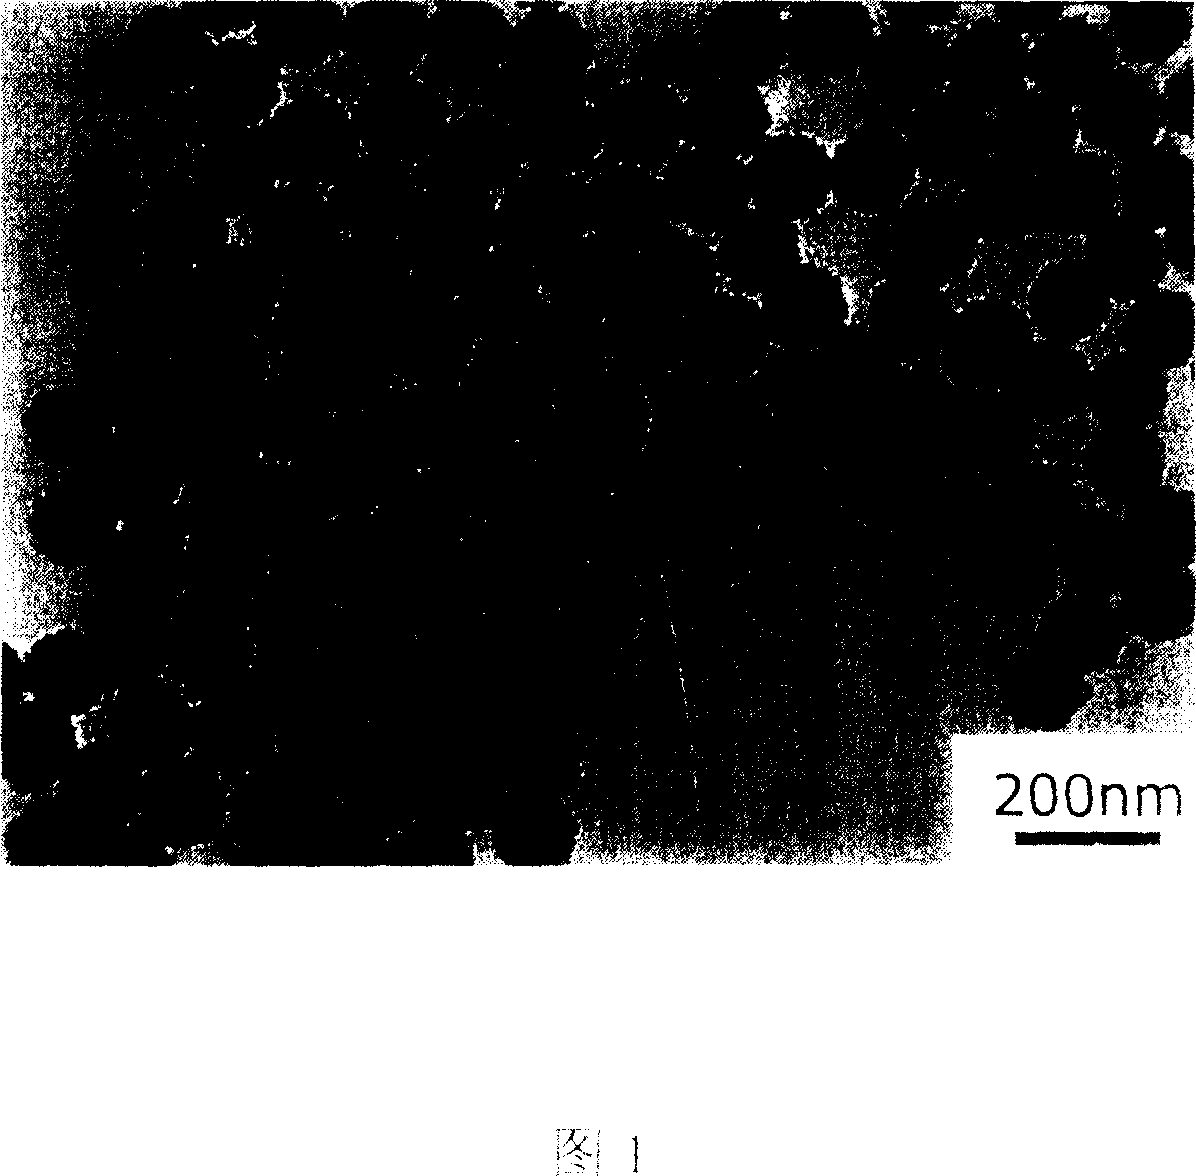 Method for preparing single dispersing ball-shape mesoporous titanium dioxide colloid particles whose size and apparance are controllable